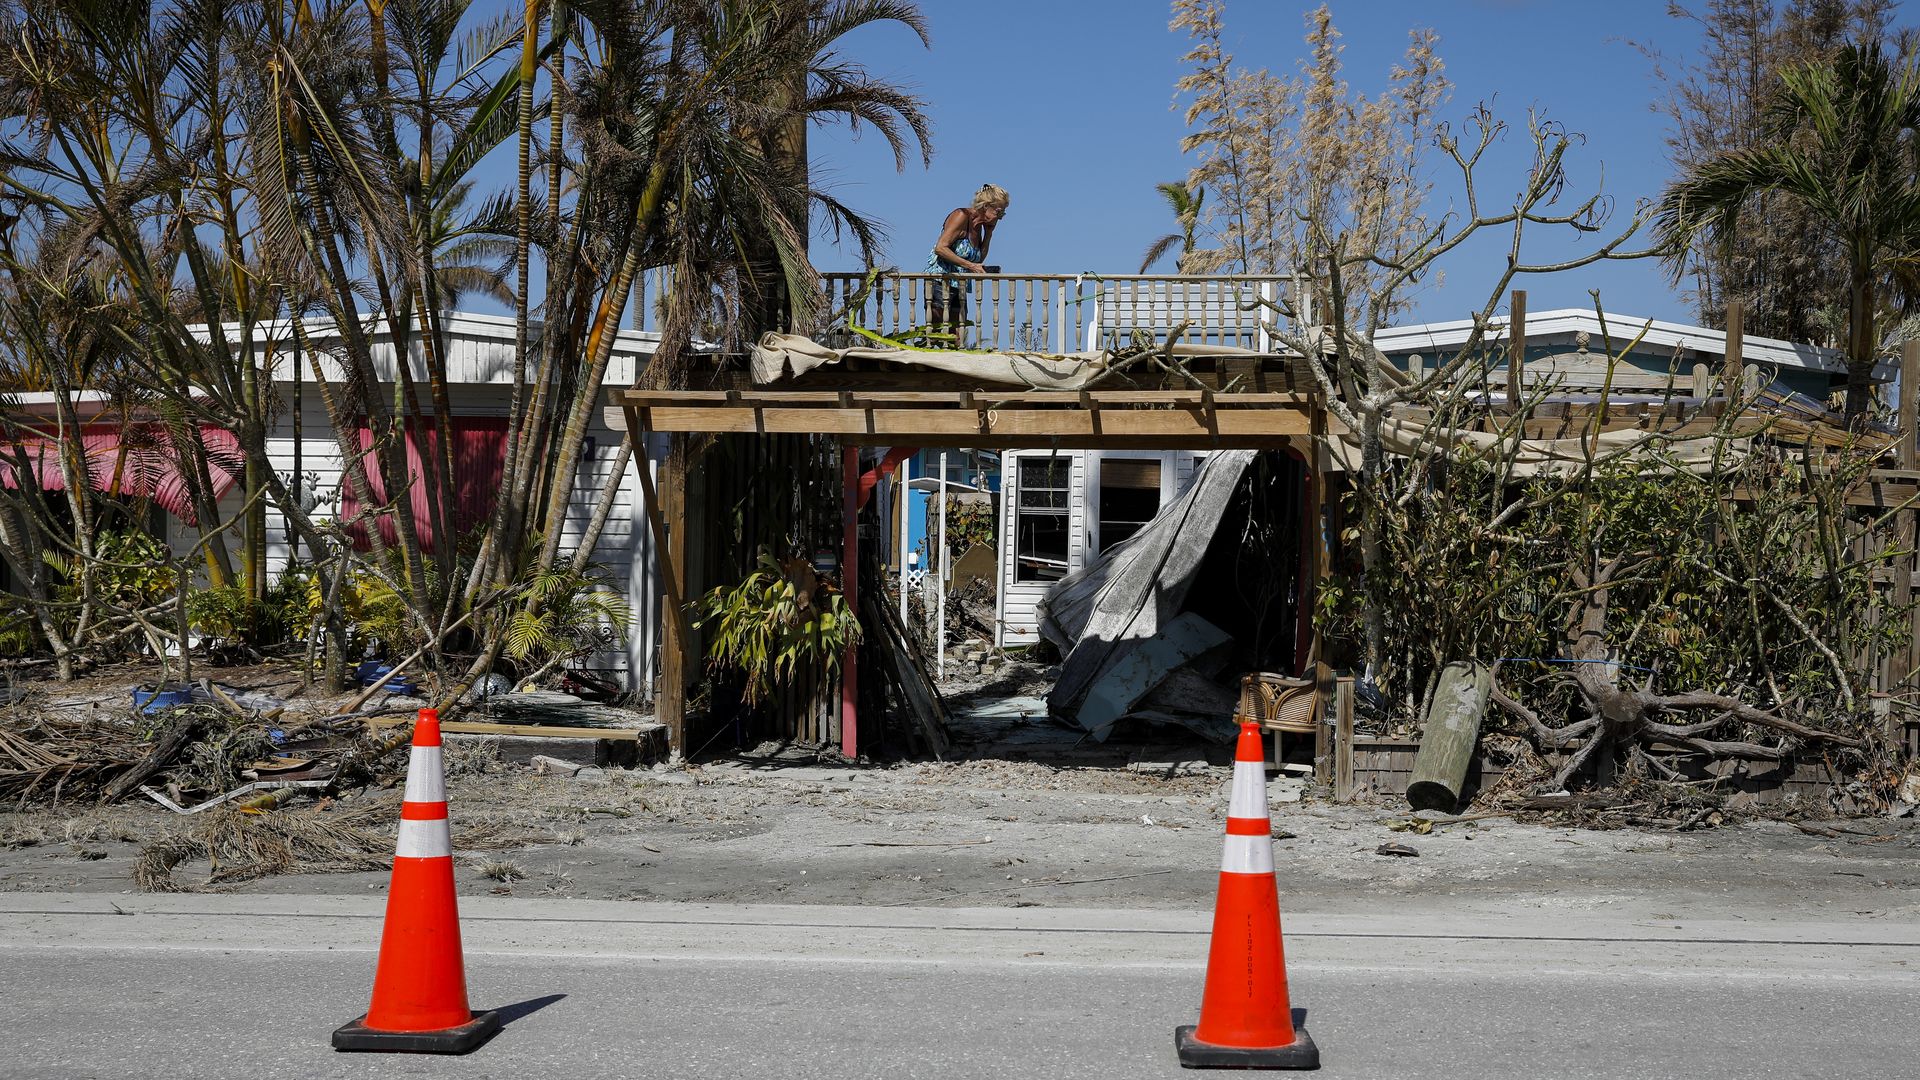  A resident takes photos of her damaged house following Hurricane Ian in Matlacha, Florida, US, on Wednesday, Oct. 5.